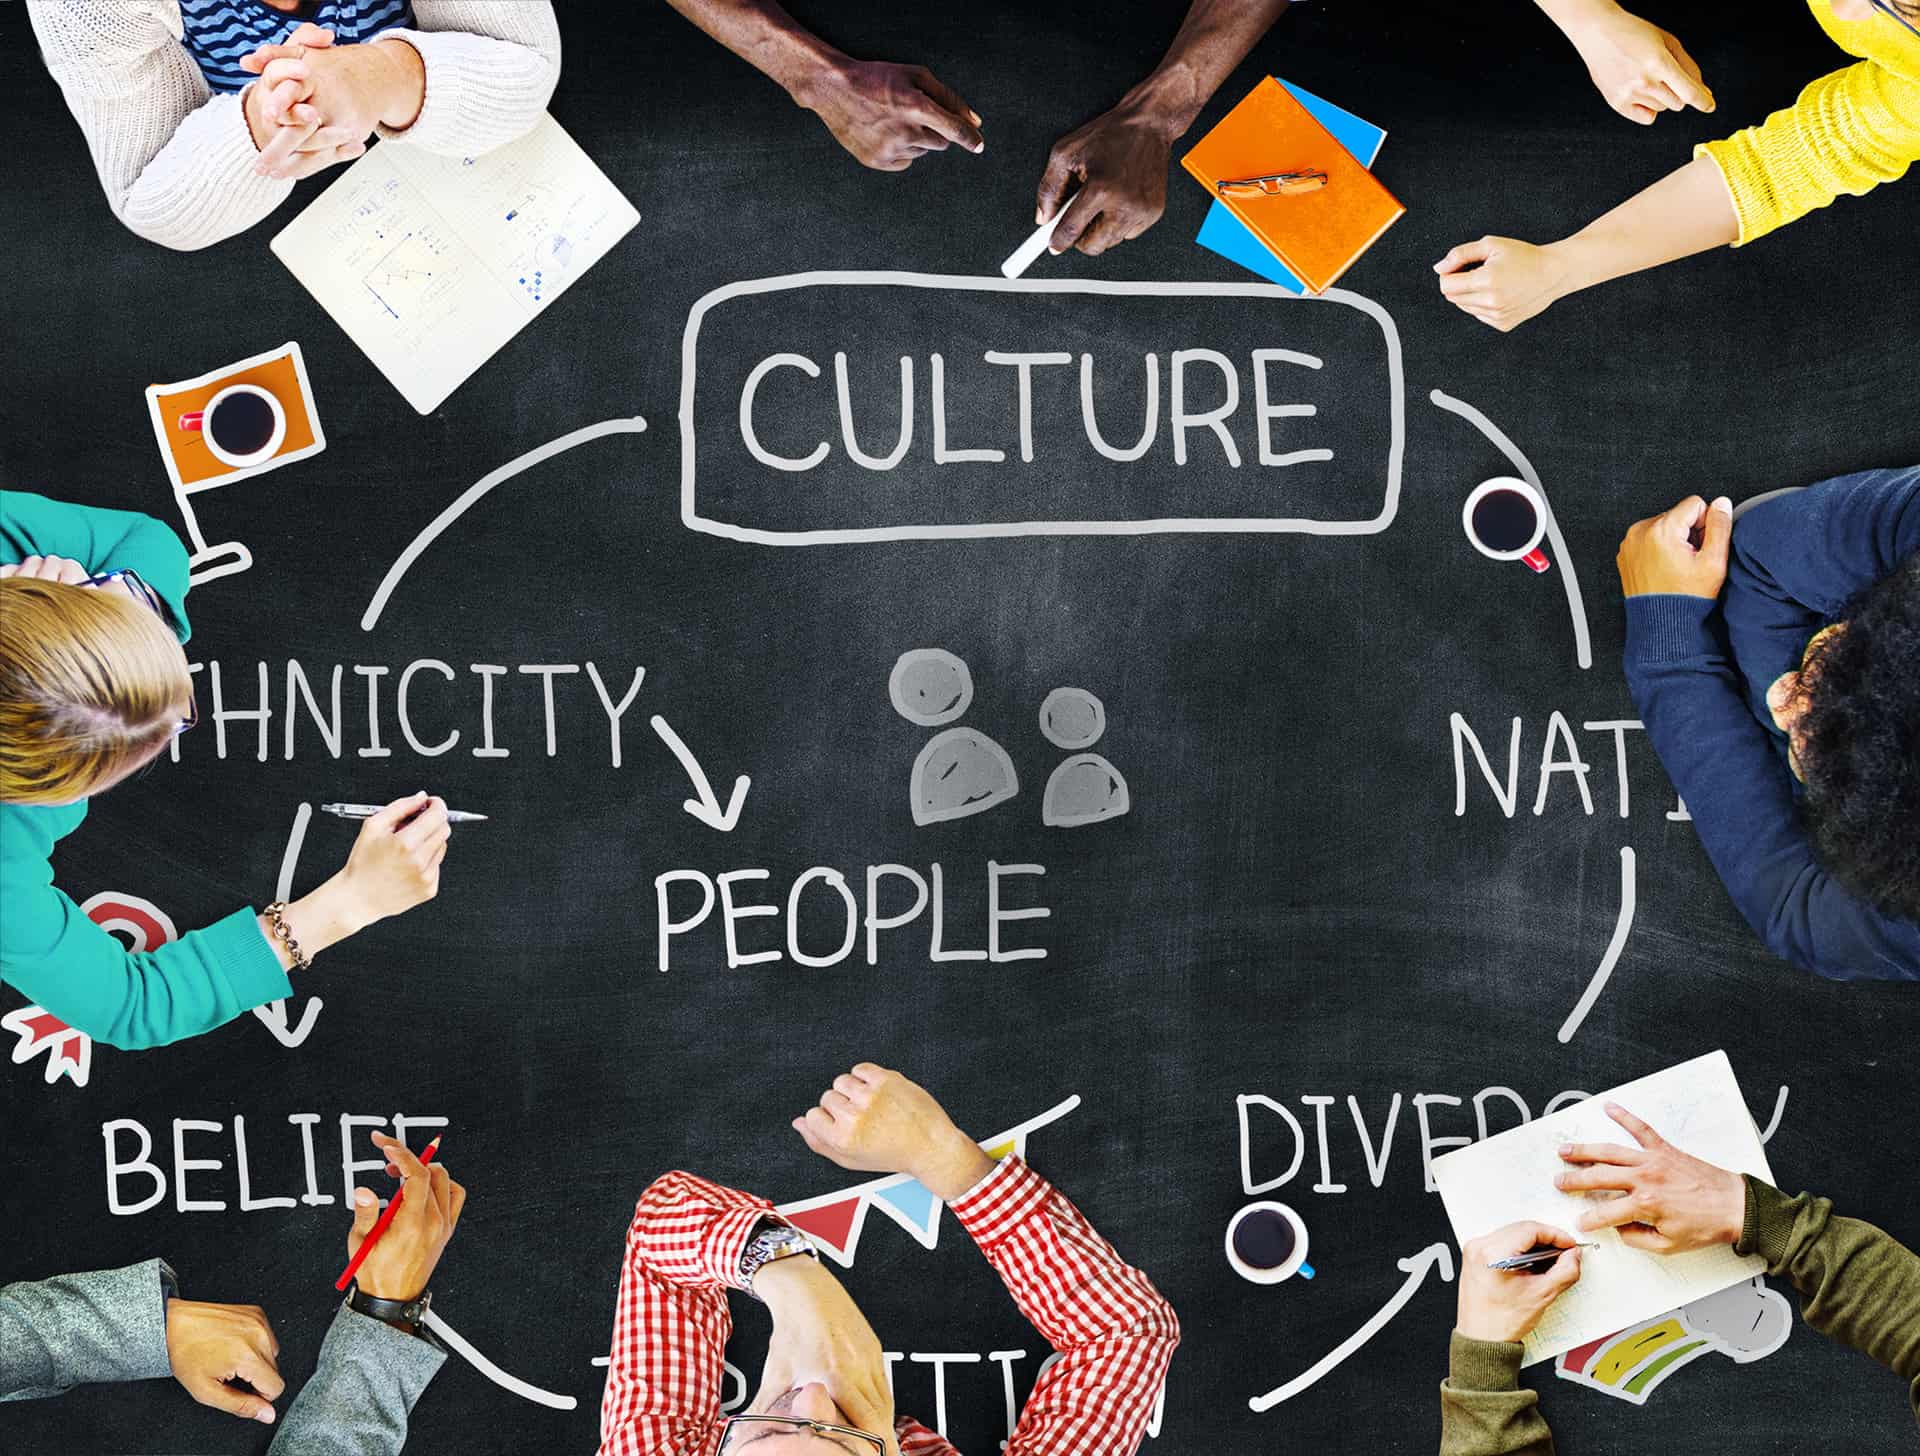 Culture, ethnicity and diversity